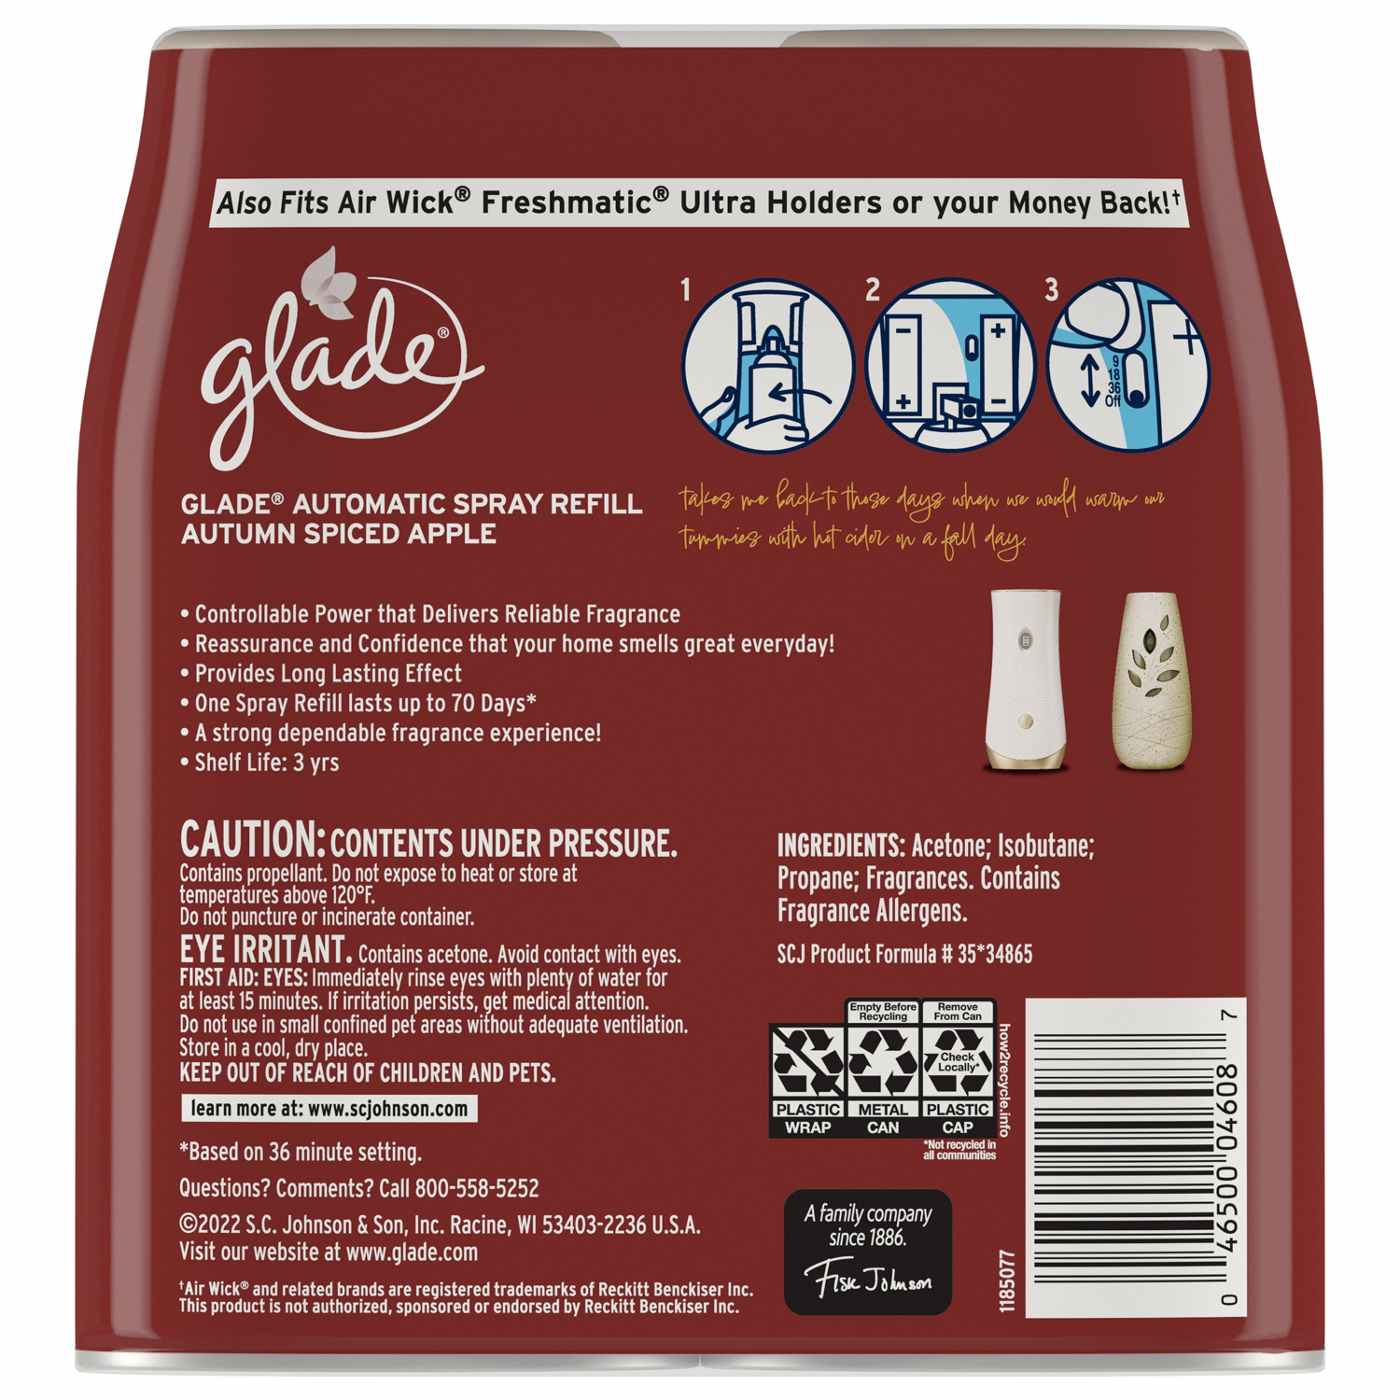 Glade Automatic Spray Refill, Value Pack - Autumn Spiced Apple; image 2 of 3